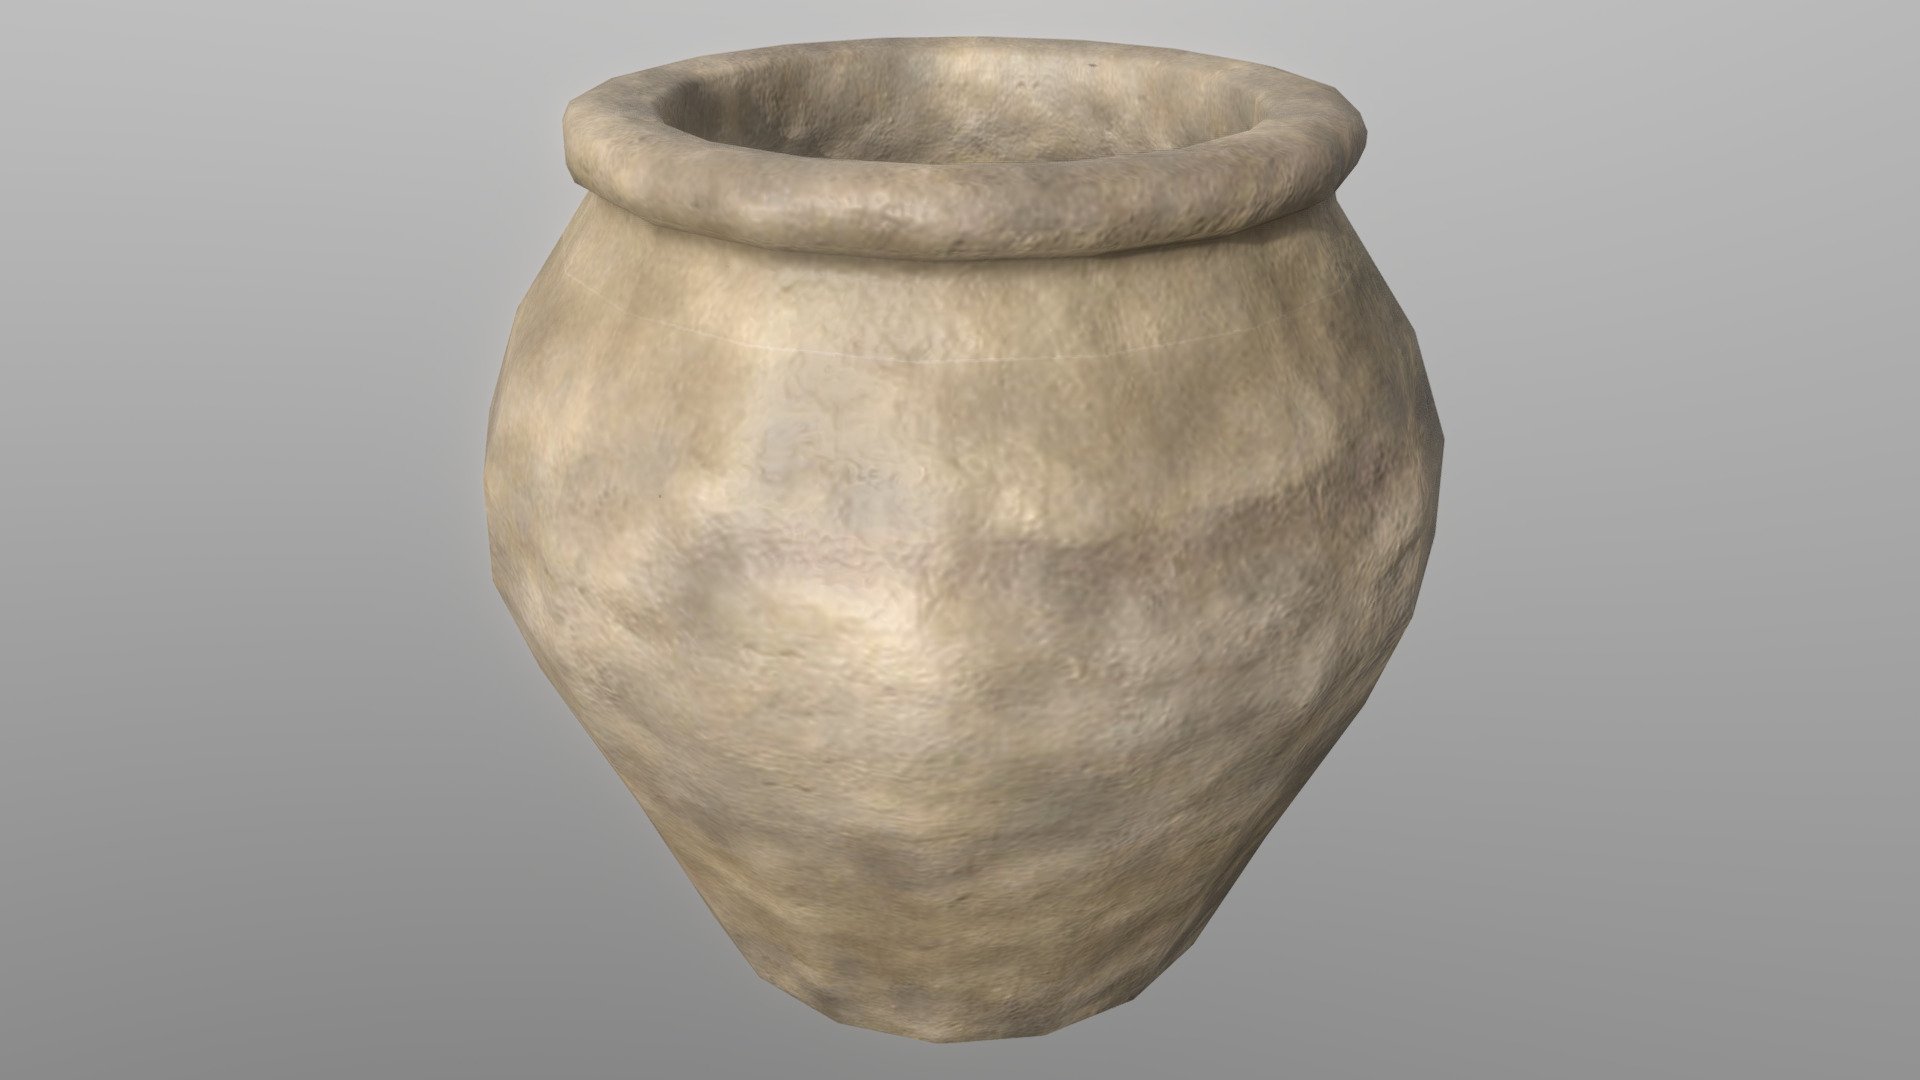 Clay Pot 1 (Viking)
Bring your 3D model of a clay pot to life with this  low-poly design. Perfect for use in games, animations, VR, AR, and more, this model is optimized for performance and still retains a high level of detail.


Features



low poly design with 397 vertices

801 edges

406 faces (polygons)

790 tris

2k PBR Textures and materials

File formats included: .obj, .fbx, .dae


Tools Used
This Clay Pot 3D model was created using Blender 3.3.1, a popular and versatile 3D creation software.


Availability
This low-poly Clay Pot 3D model is ready for use and available for purchase. Bring your project to the next level with this high-quality and optimized model 3d model